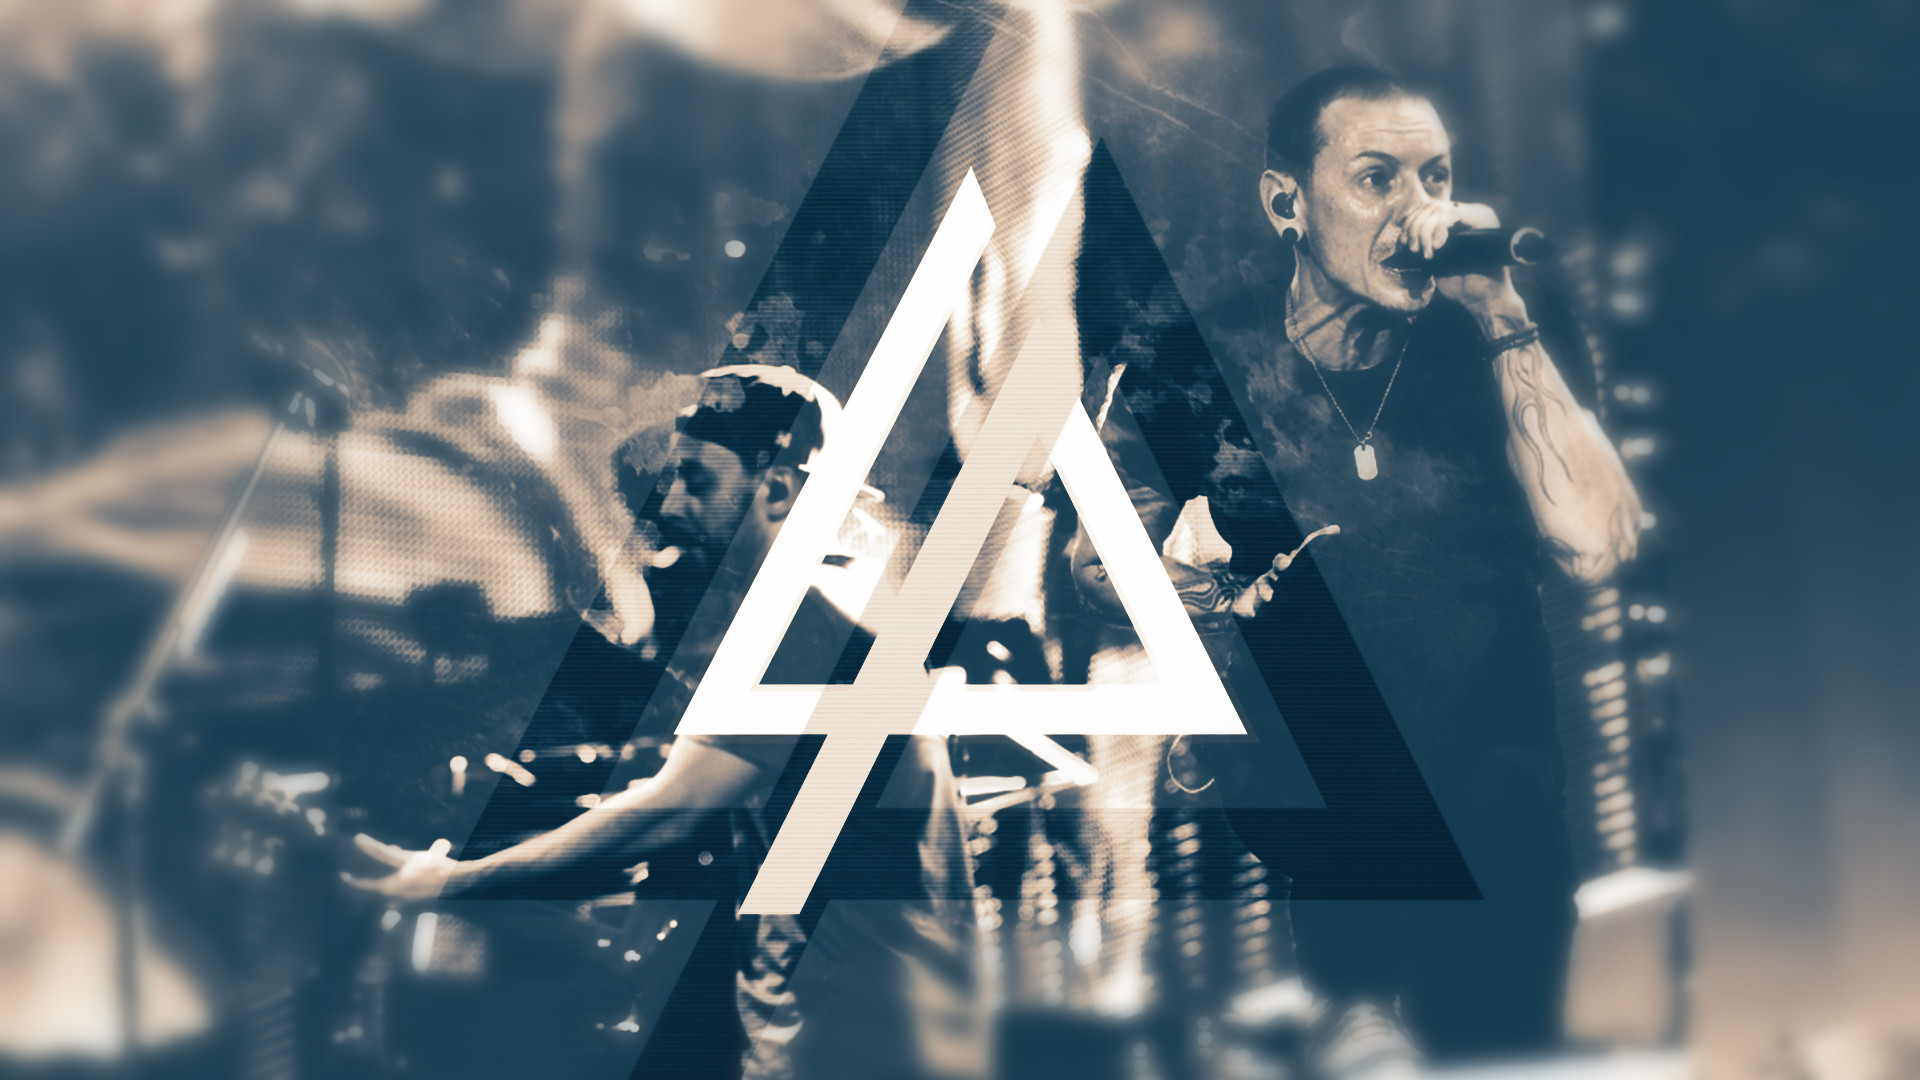 linkin park live in texas full album free download